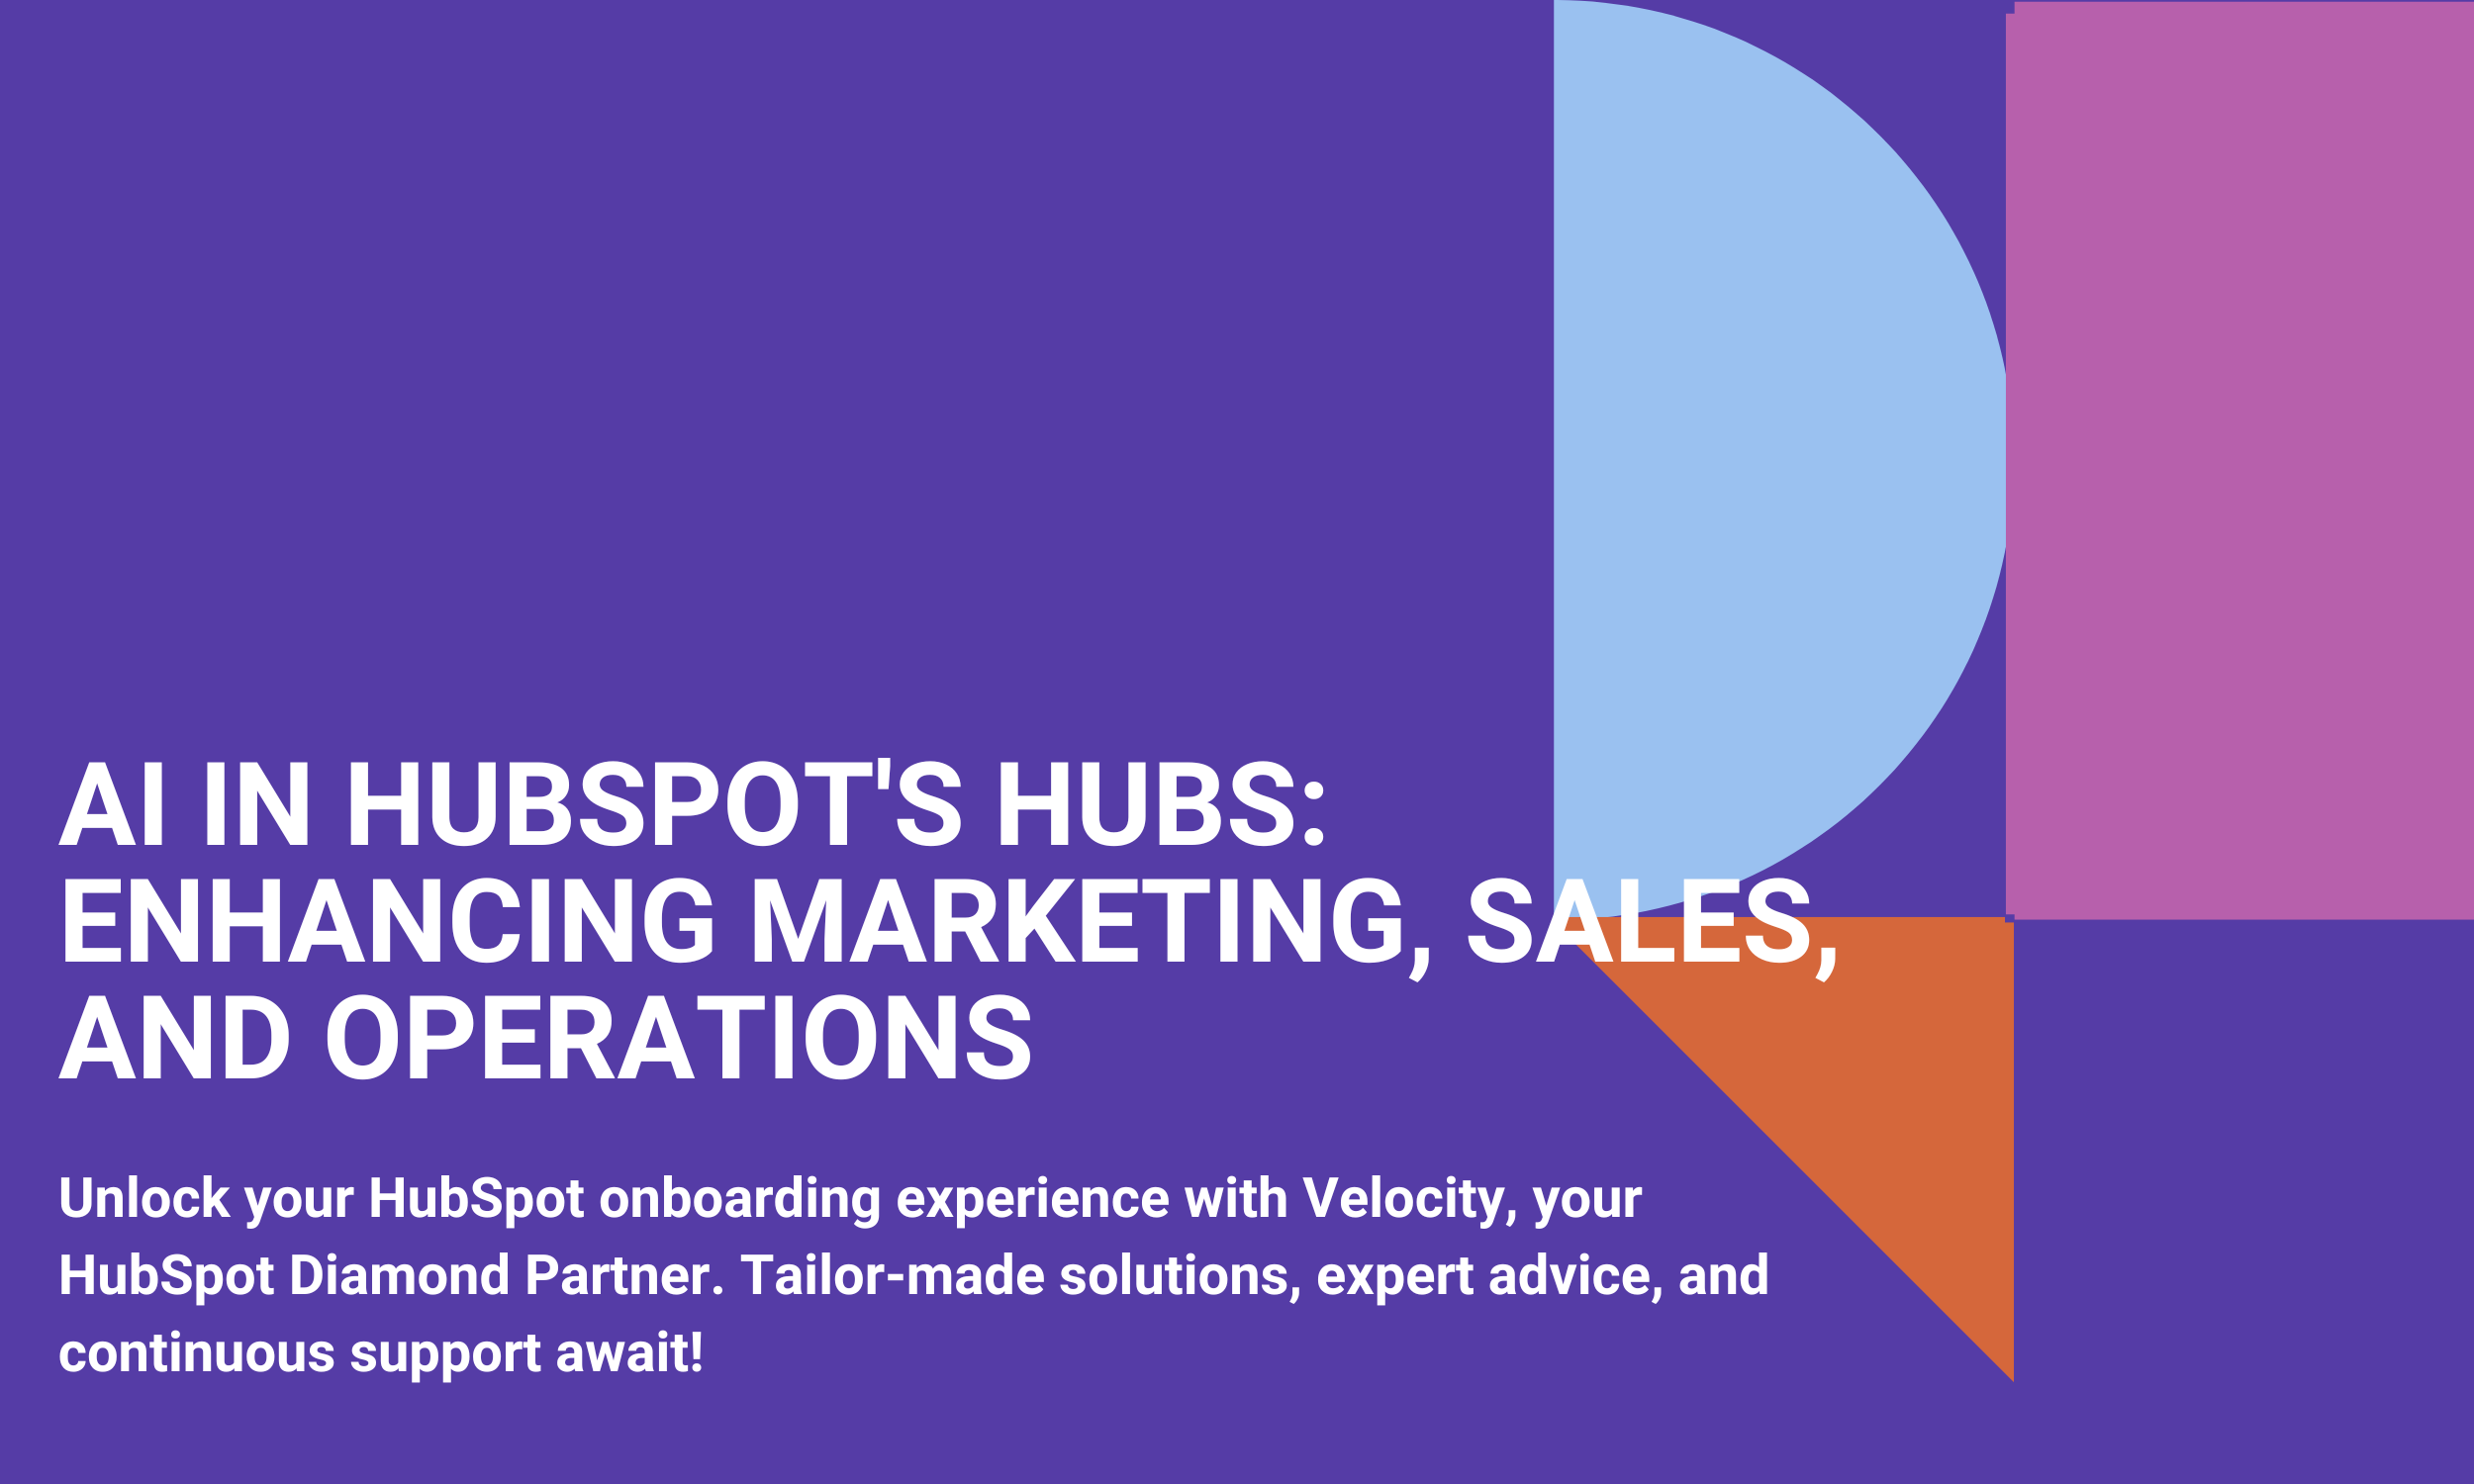 AI in HubSpot's Hubs: Enhancing Marketing, Sales, and Operations